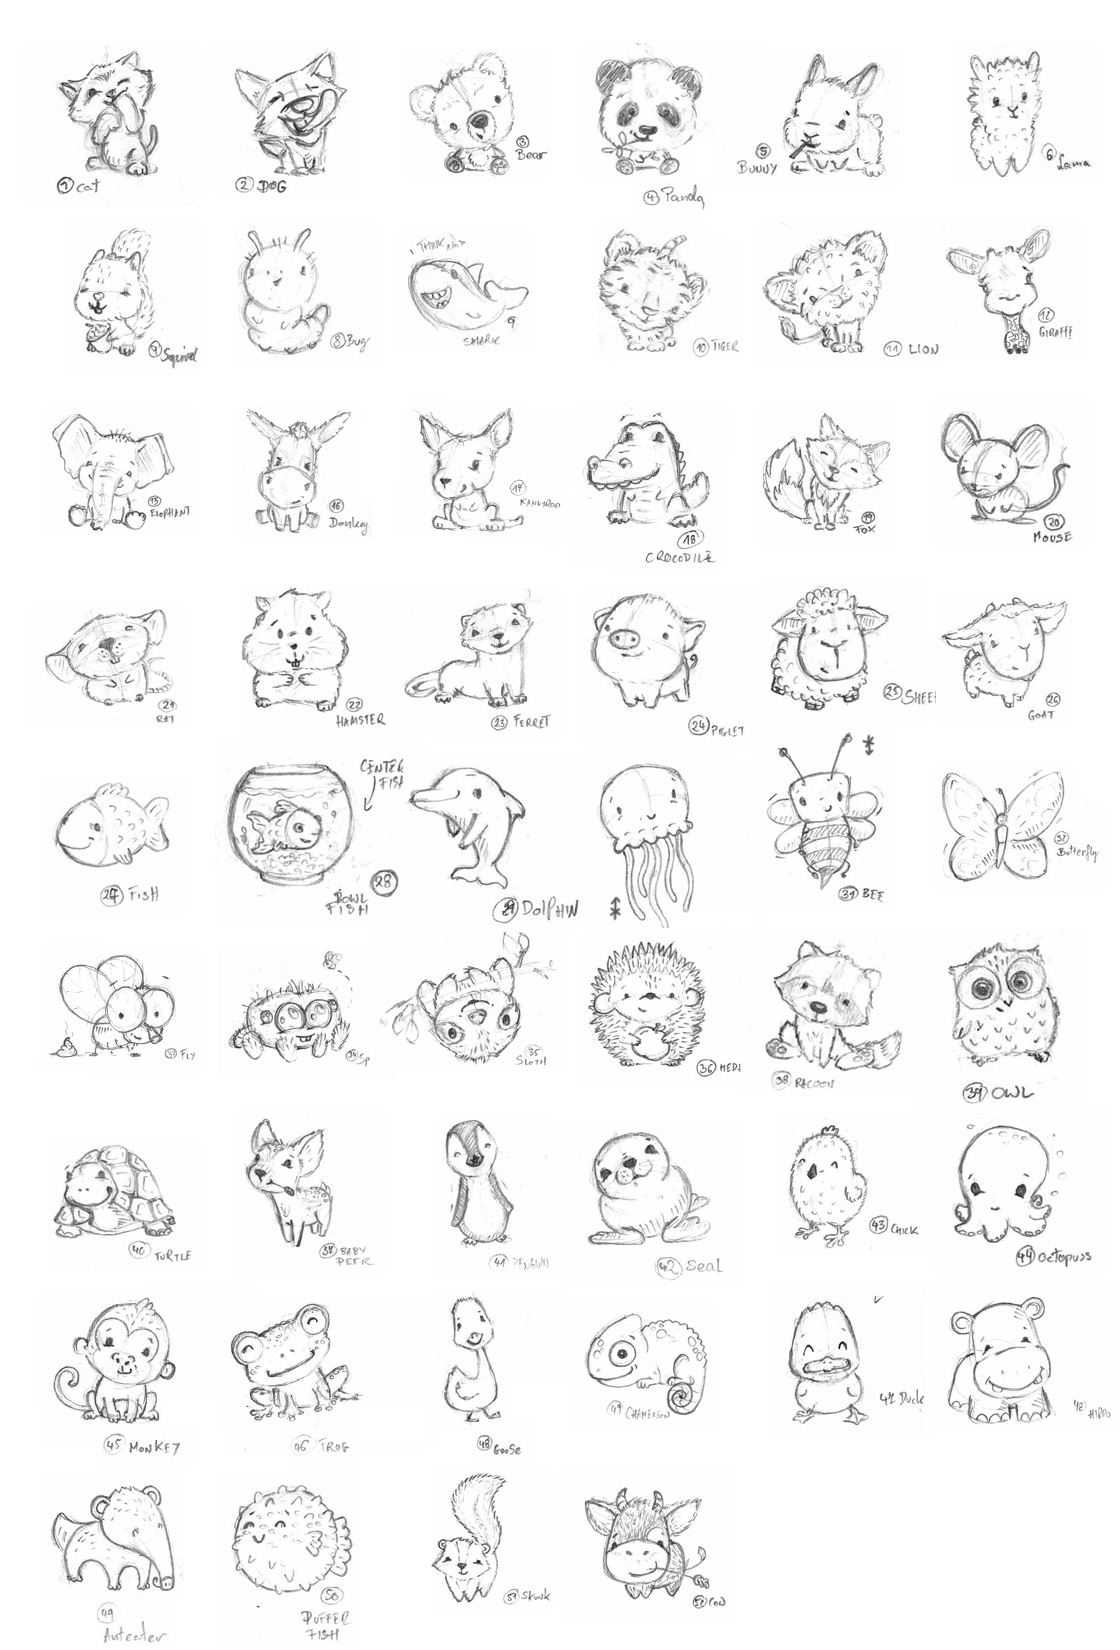 Cute Animal Icons Initial sketches